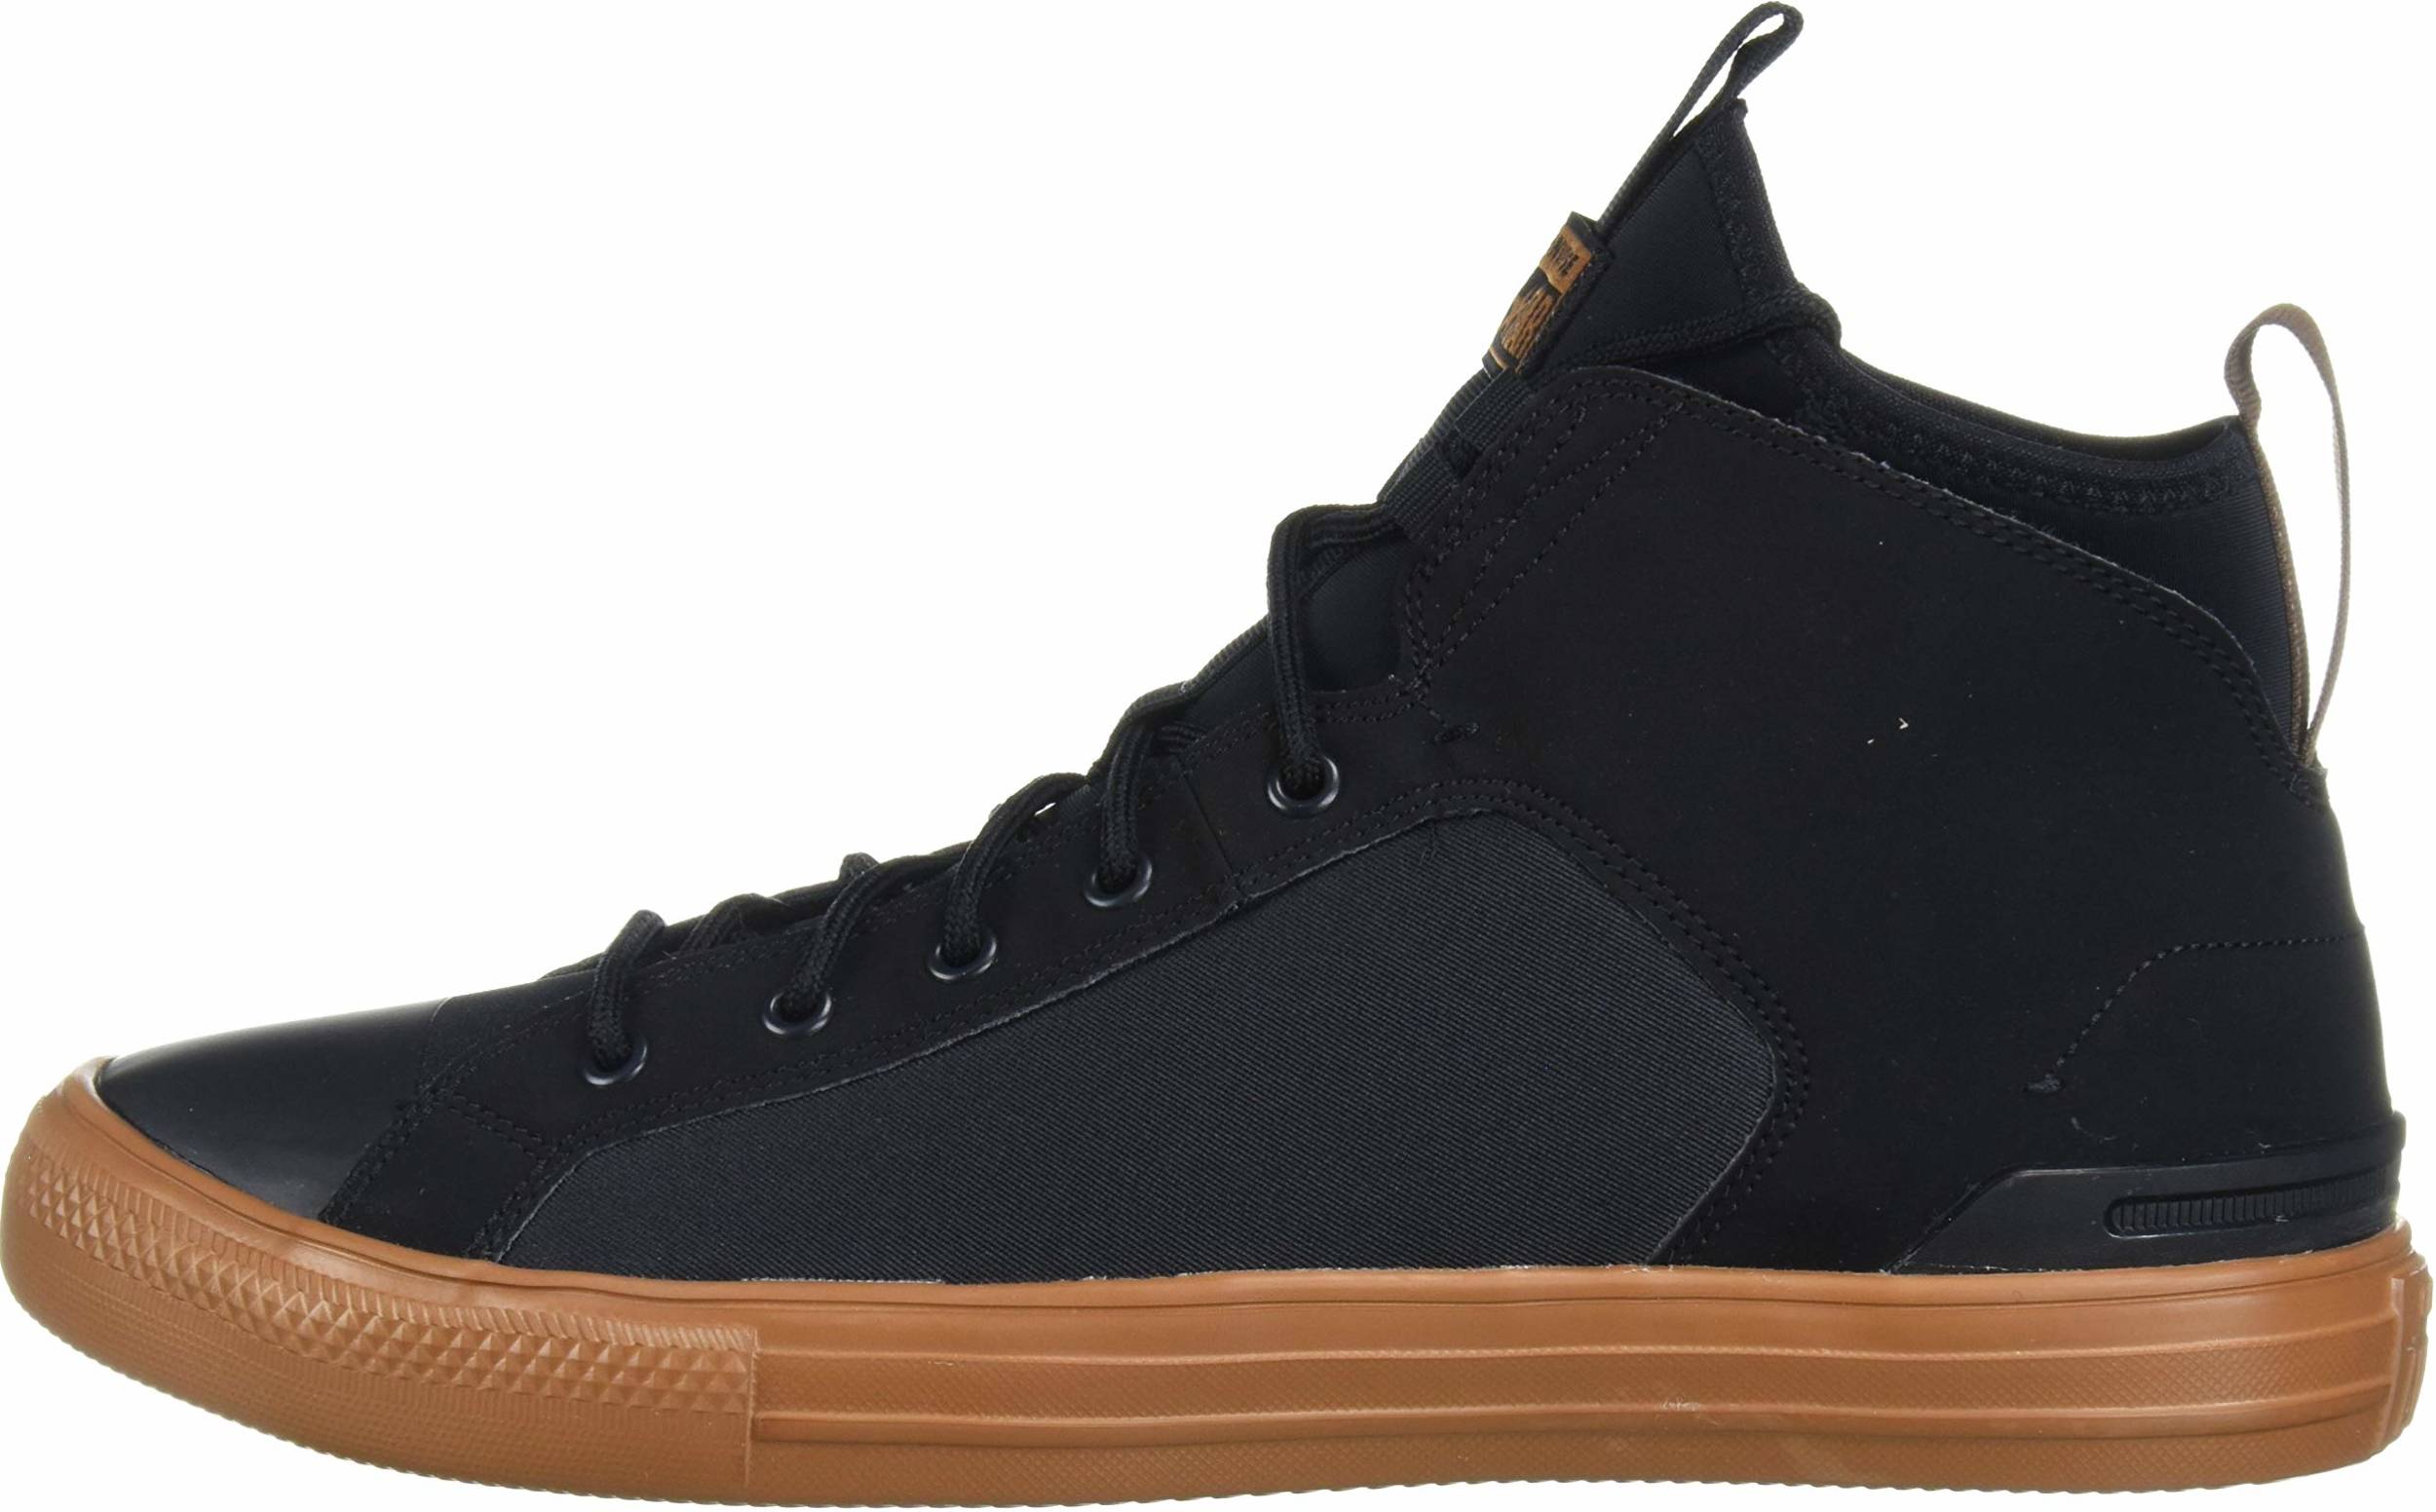 Converse Chuck Taylor All Star Ultra sneakers in black (only $50) |  RunRepeat